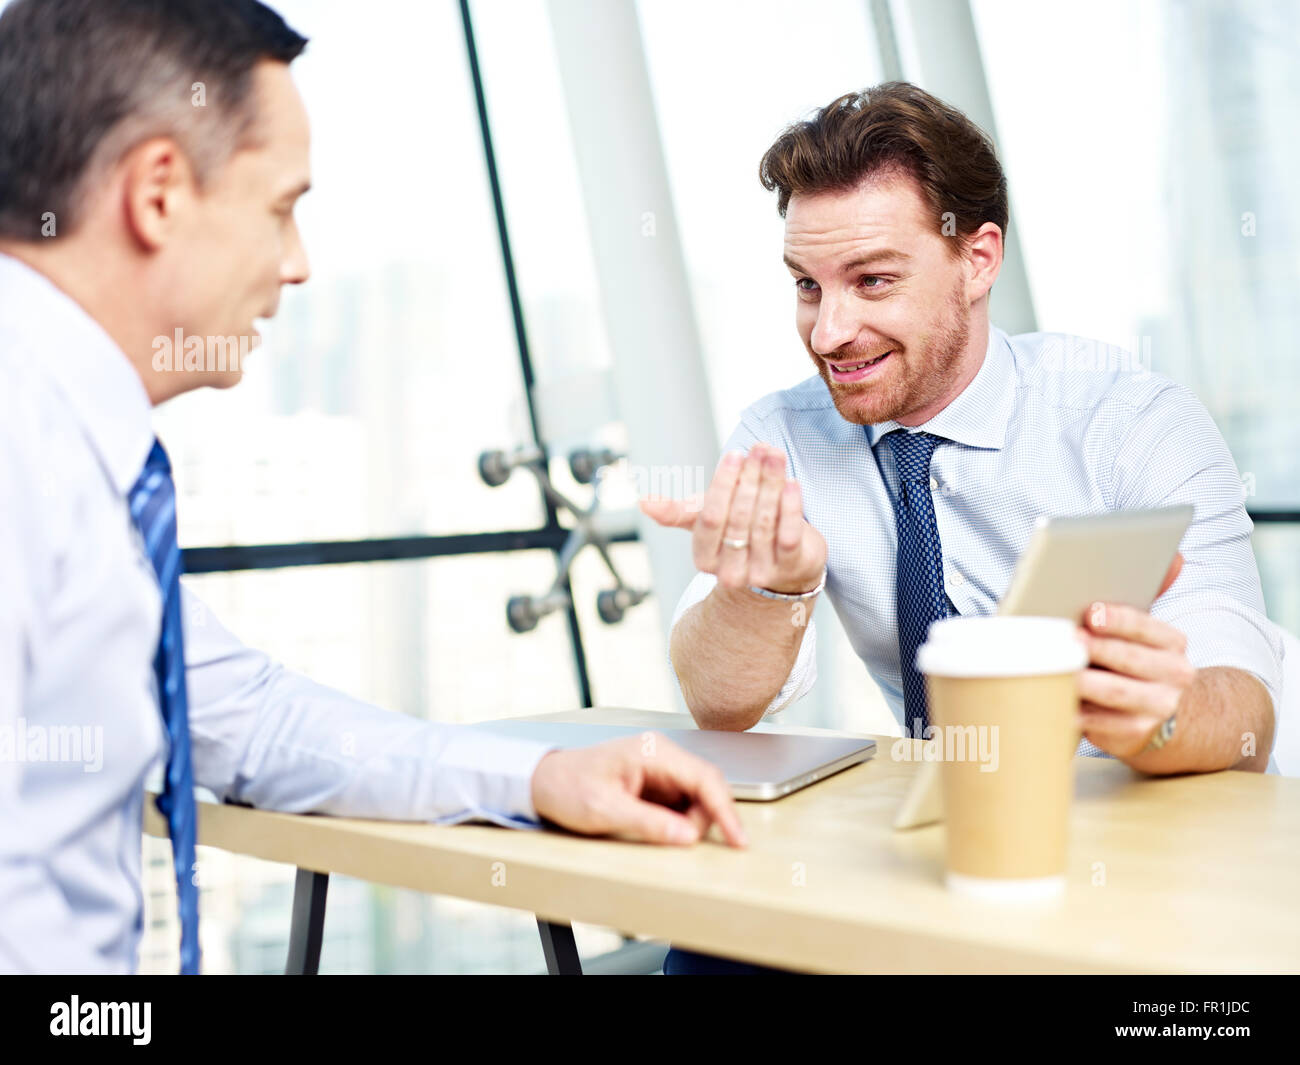 corporate people discussing business in office. Stock Photo